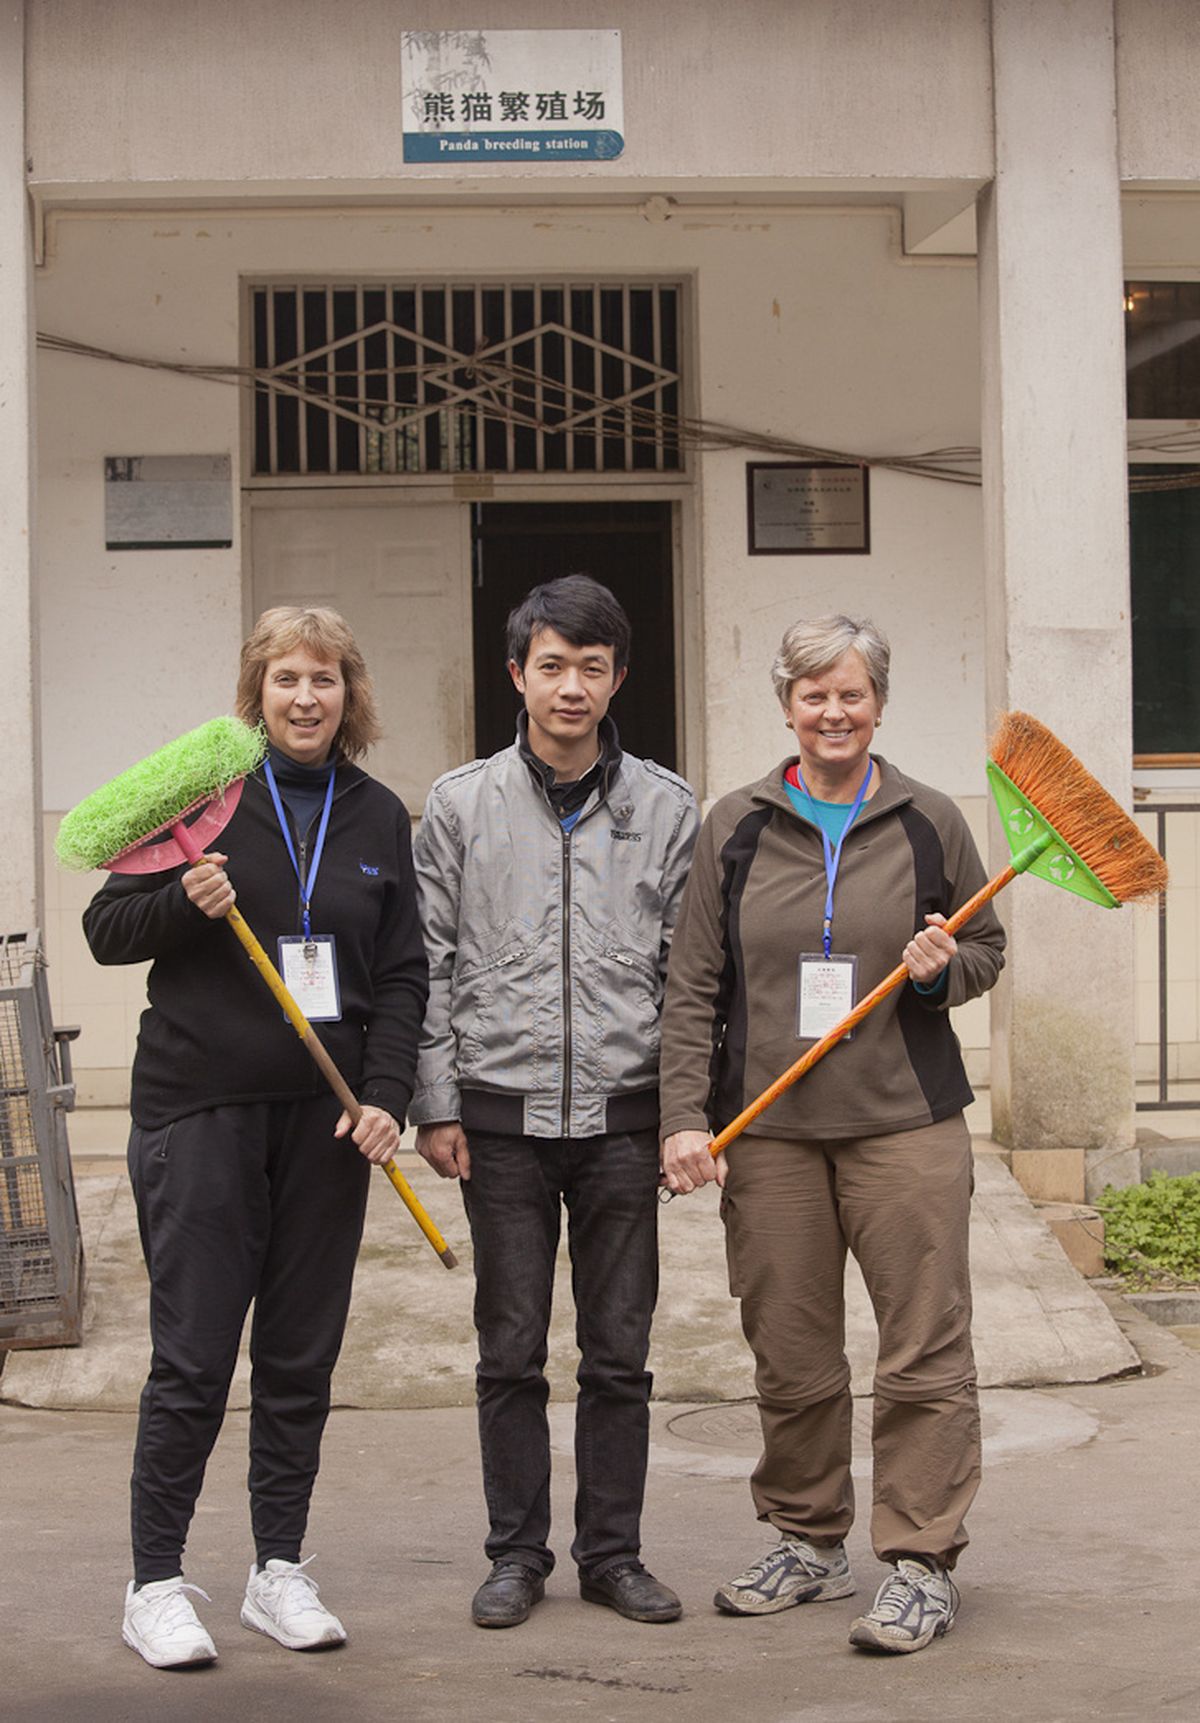 Susan Snelson Spiegel, left, poses with the panda keeper and her sister, Chris Thompson, at a panda reserve outside Chengdu, China.